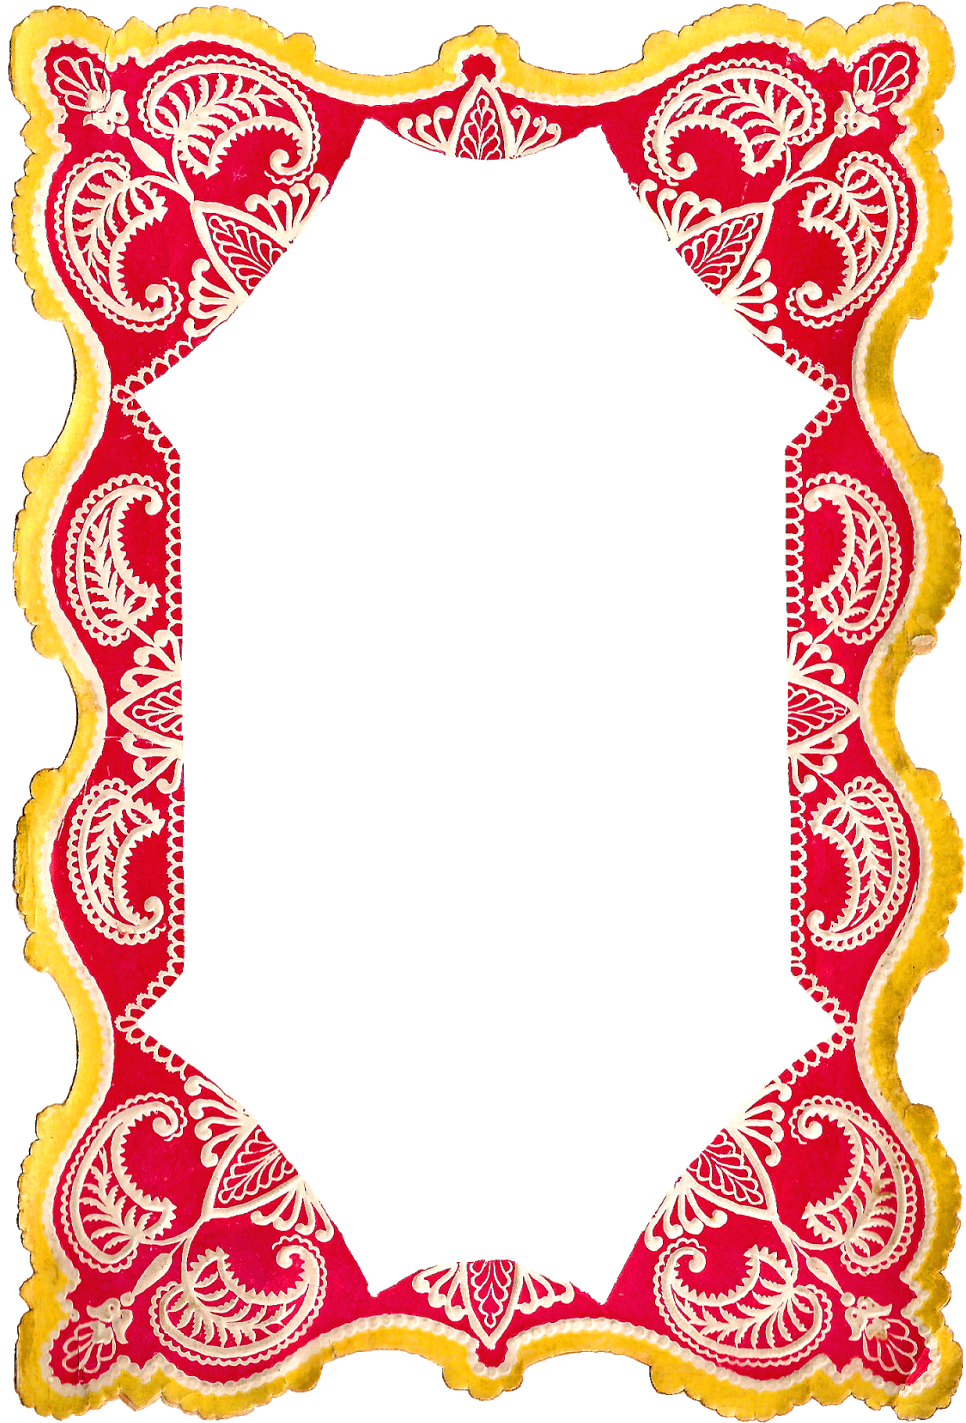 See Here Clip Art Borders And Frames Free Images - Red And Yellow Frames (1137x1600)